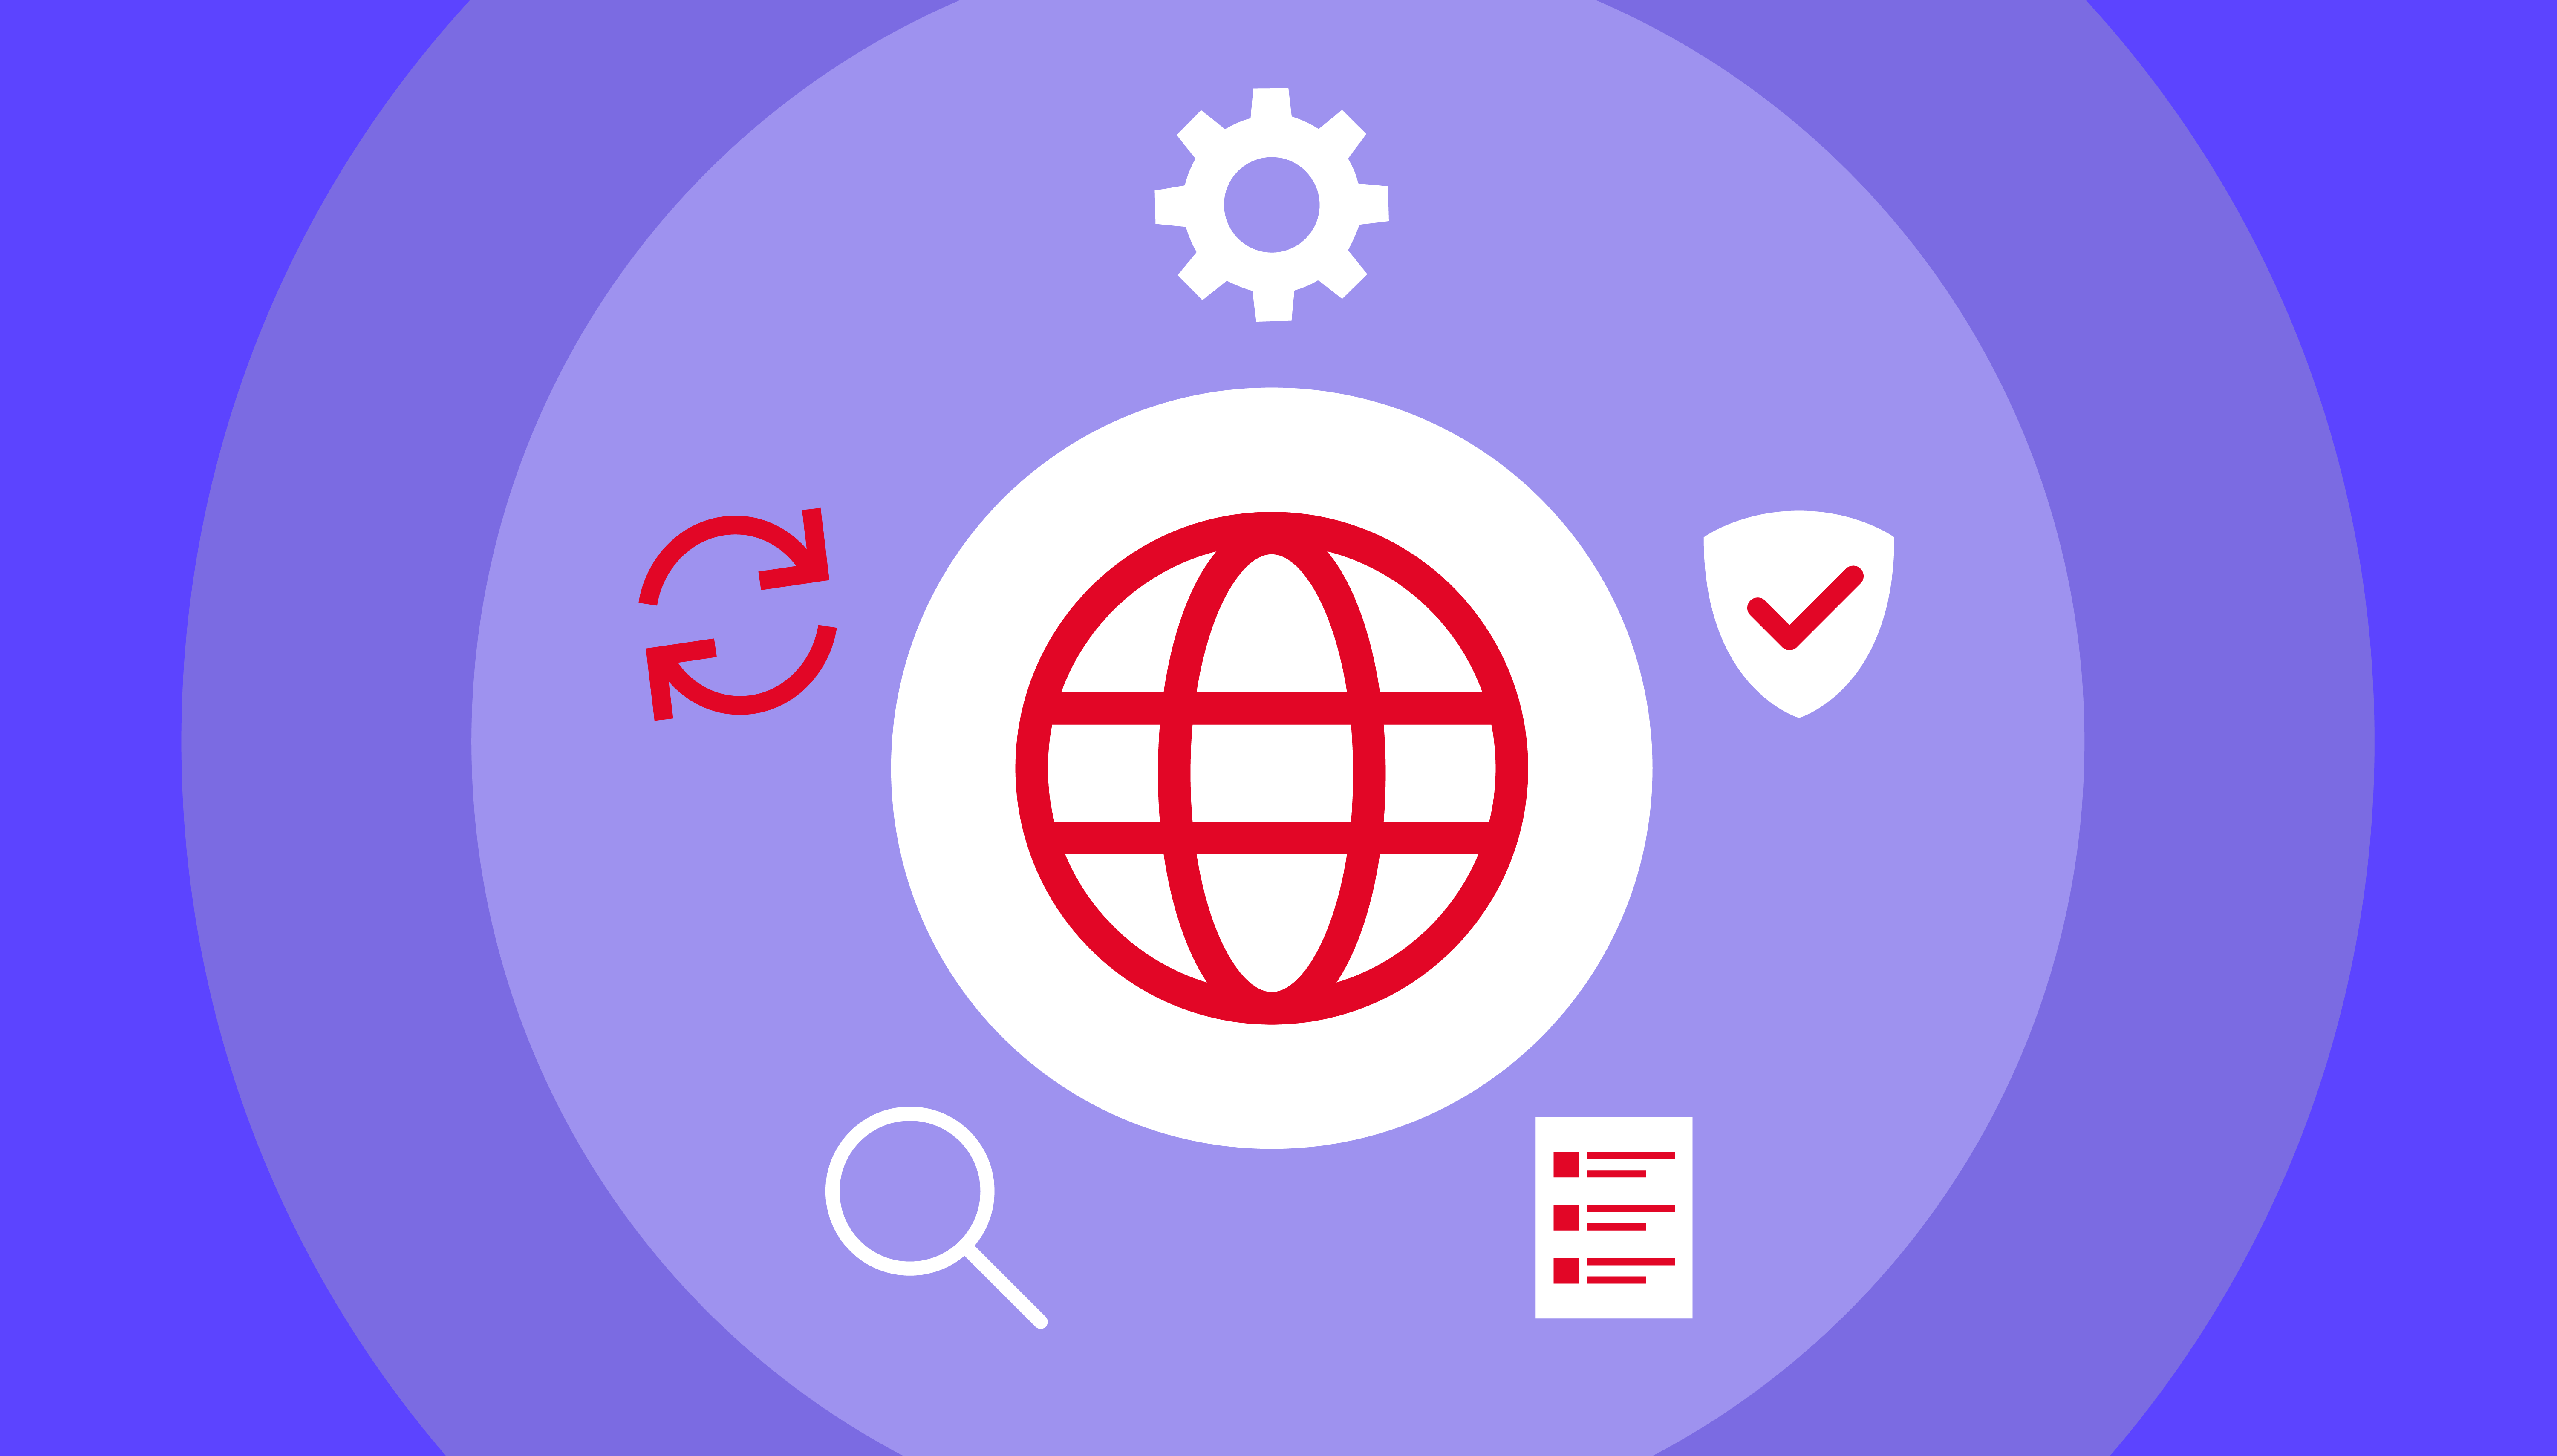 A decorative image showing a globe icon surrounded by a search icon, a backup icon, a cog, a shield with a checkmark, and a checklist.